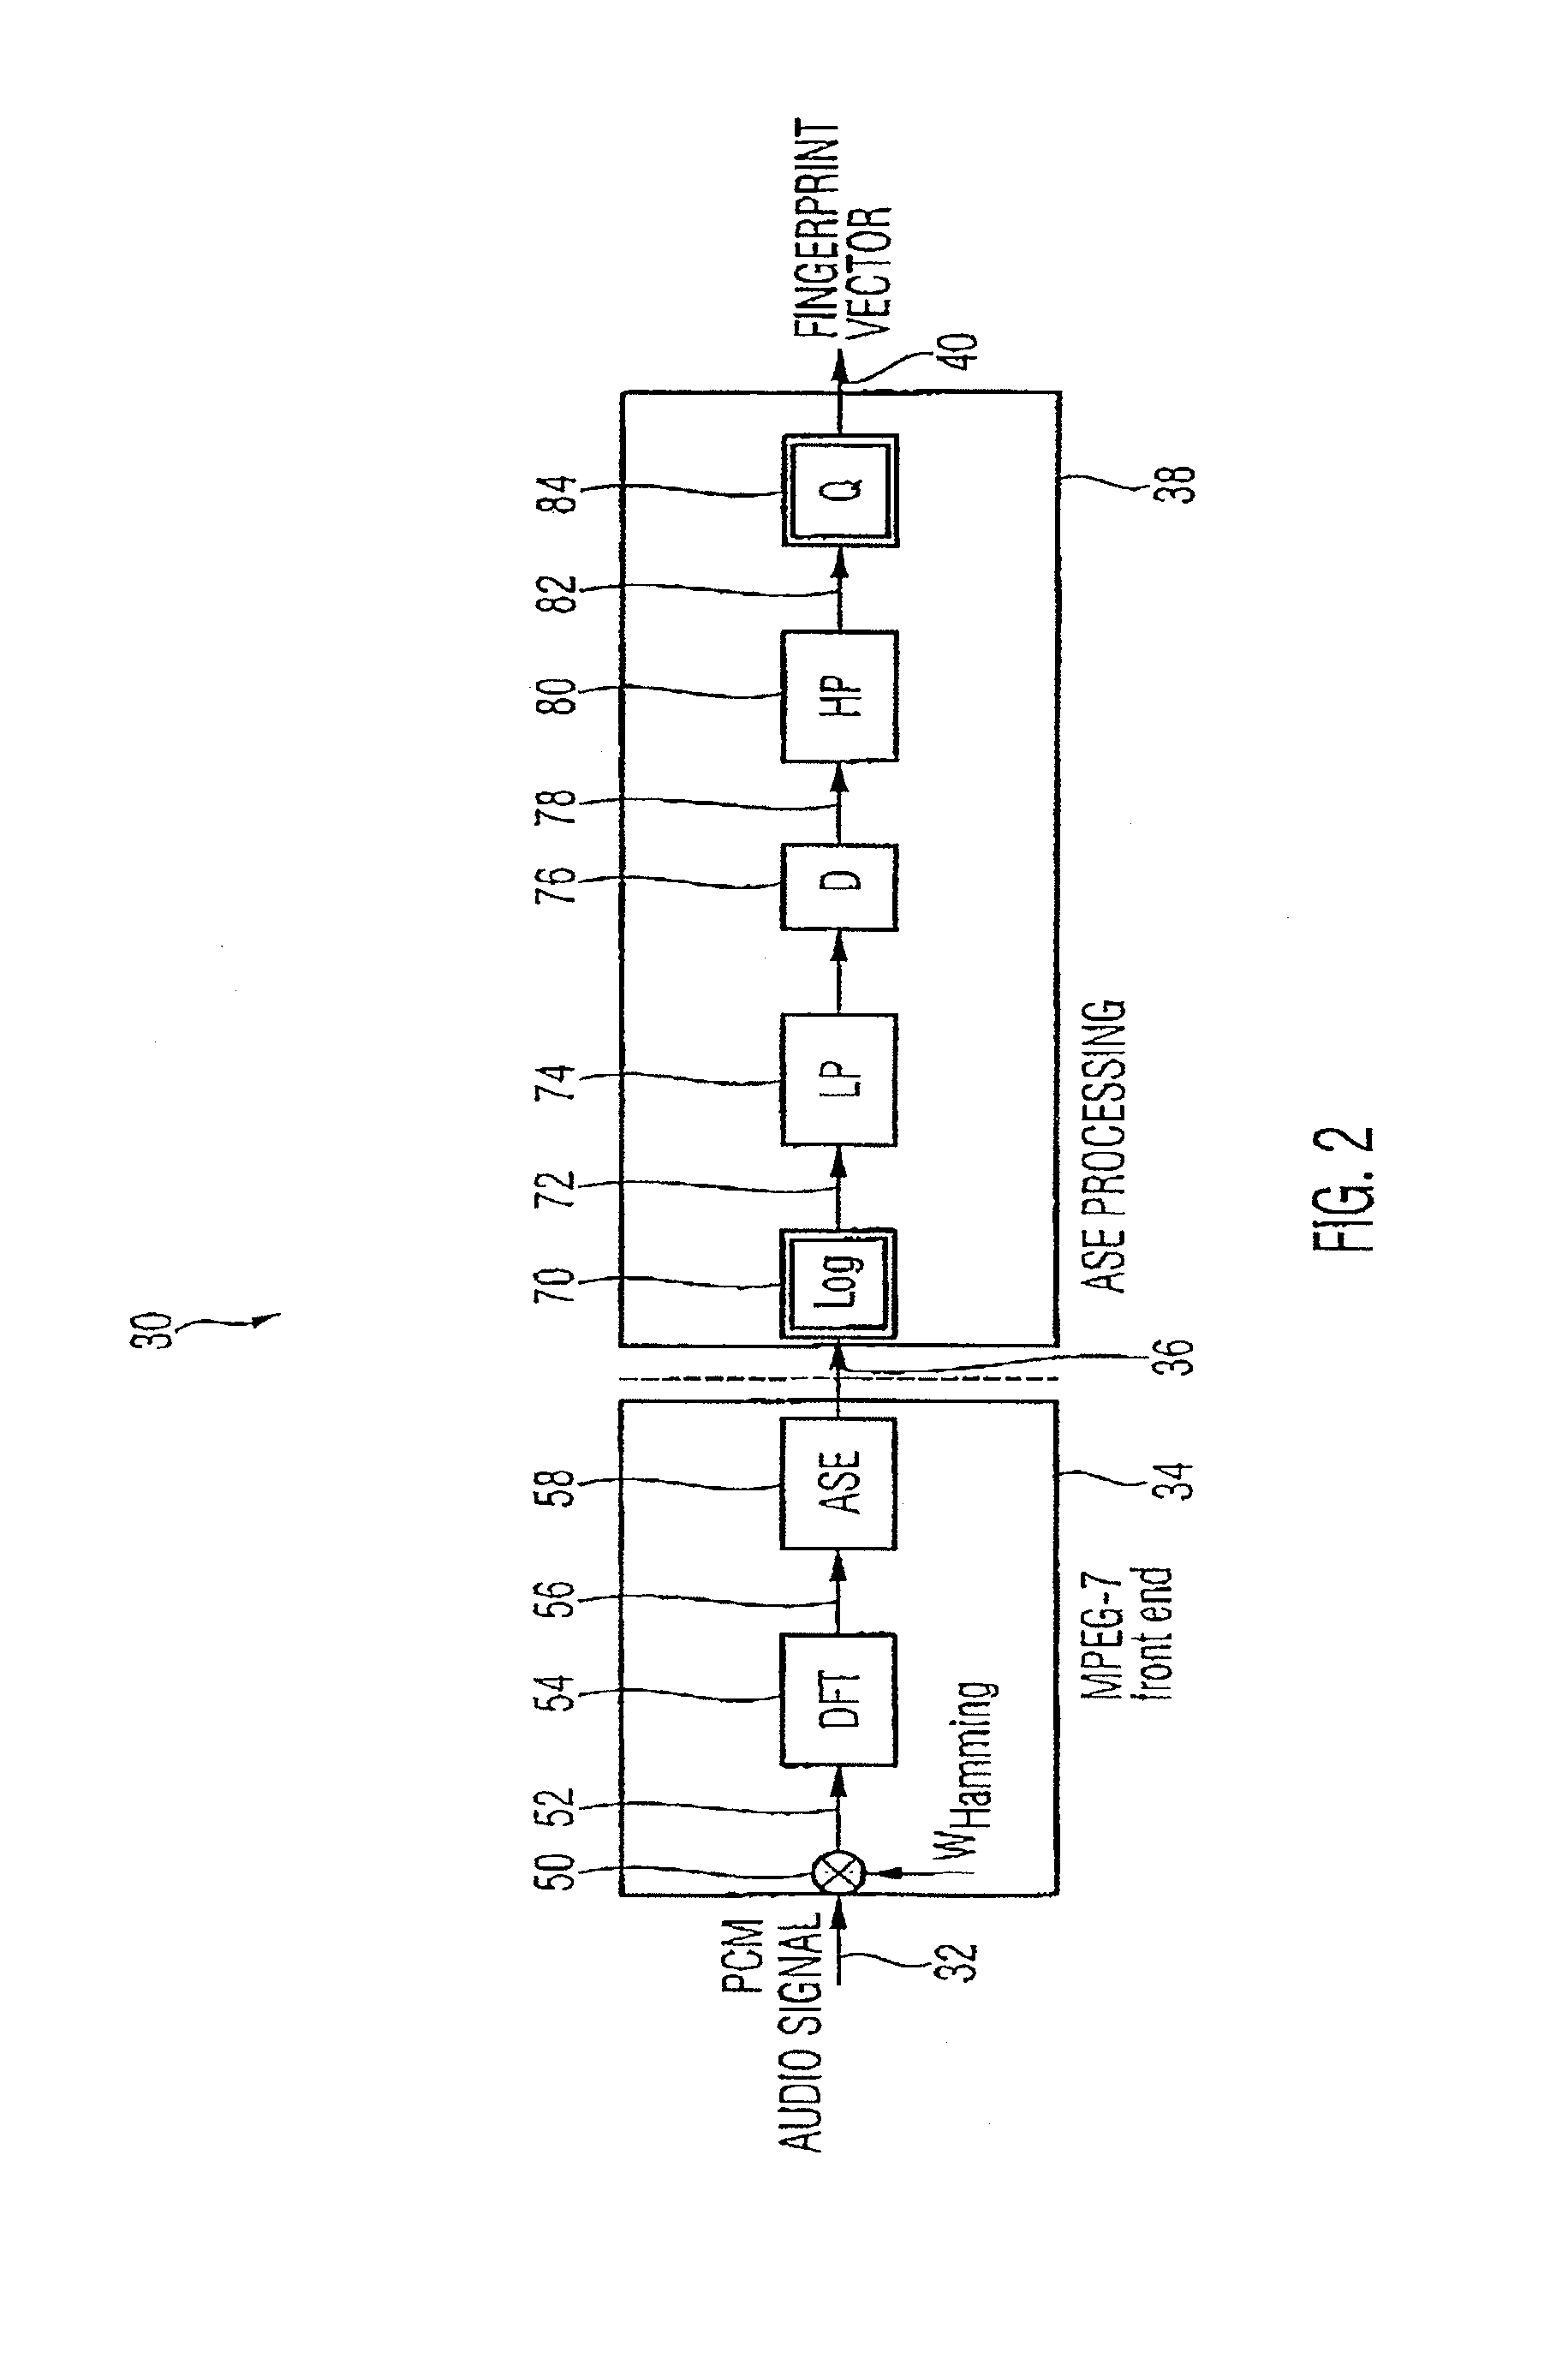 Apparatus and method for robust classification of audio signals, and method for establishing and operating an audio-signal database, as well as computer program